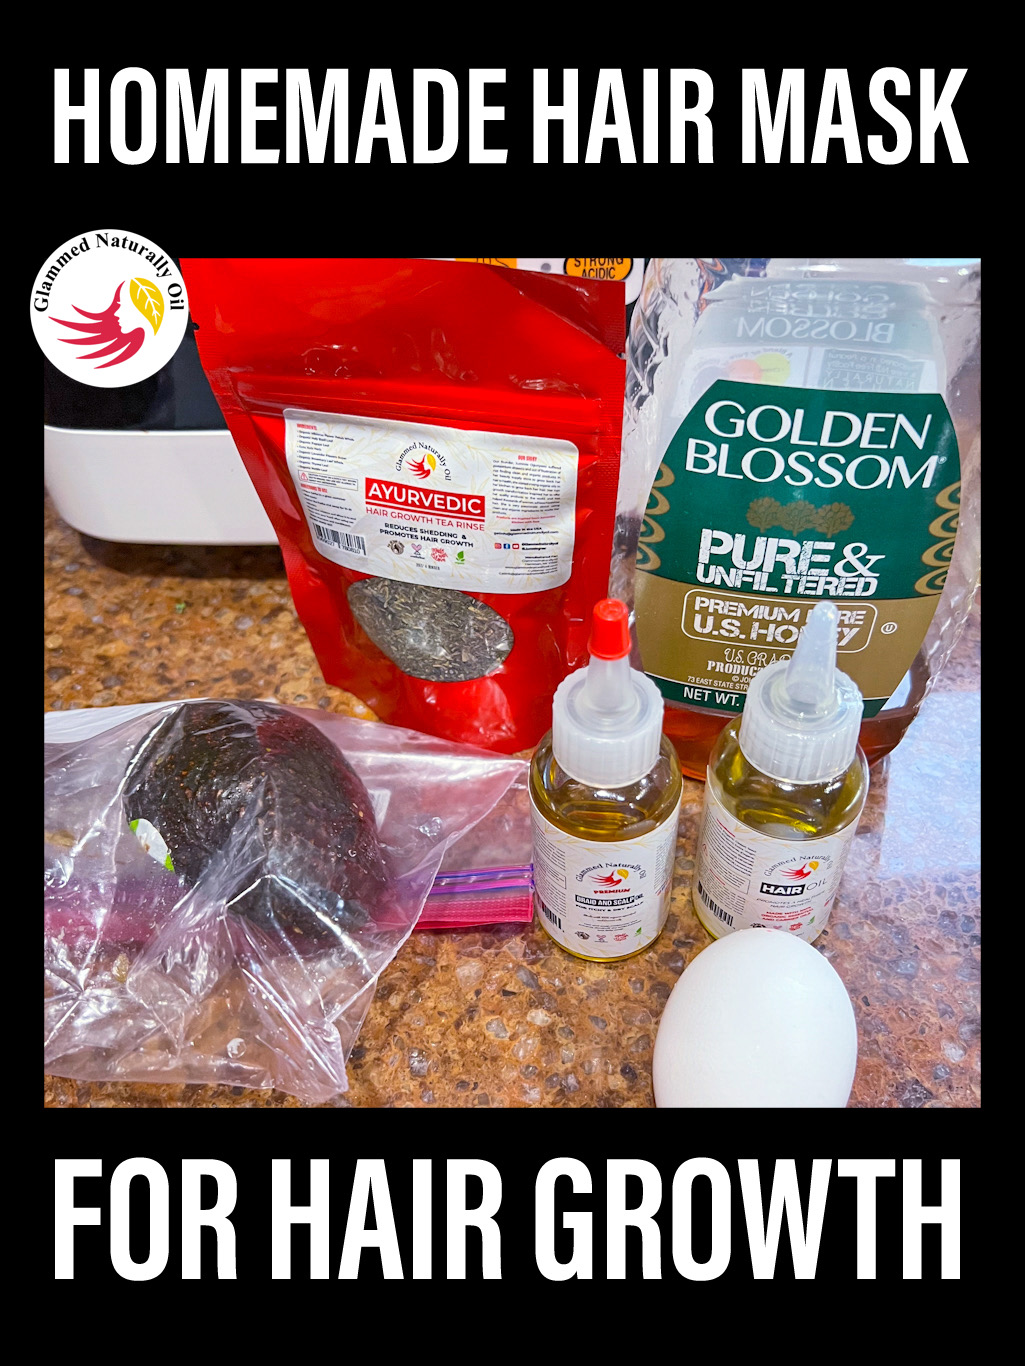 Home made hair growth mask